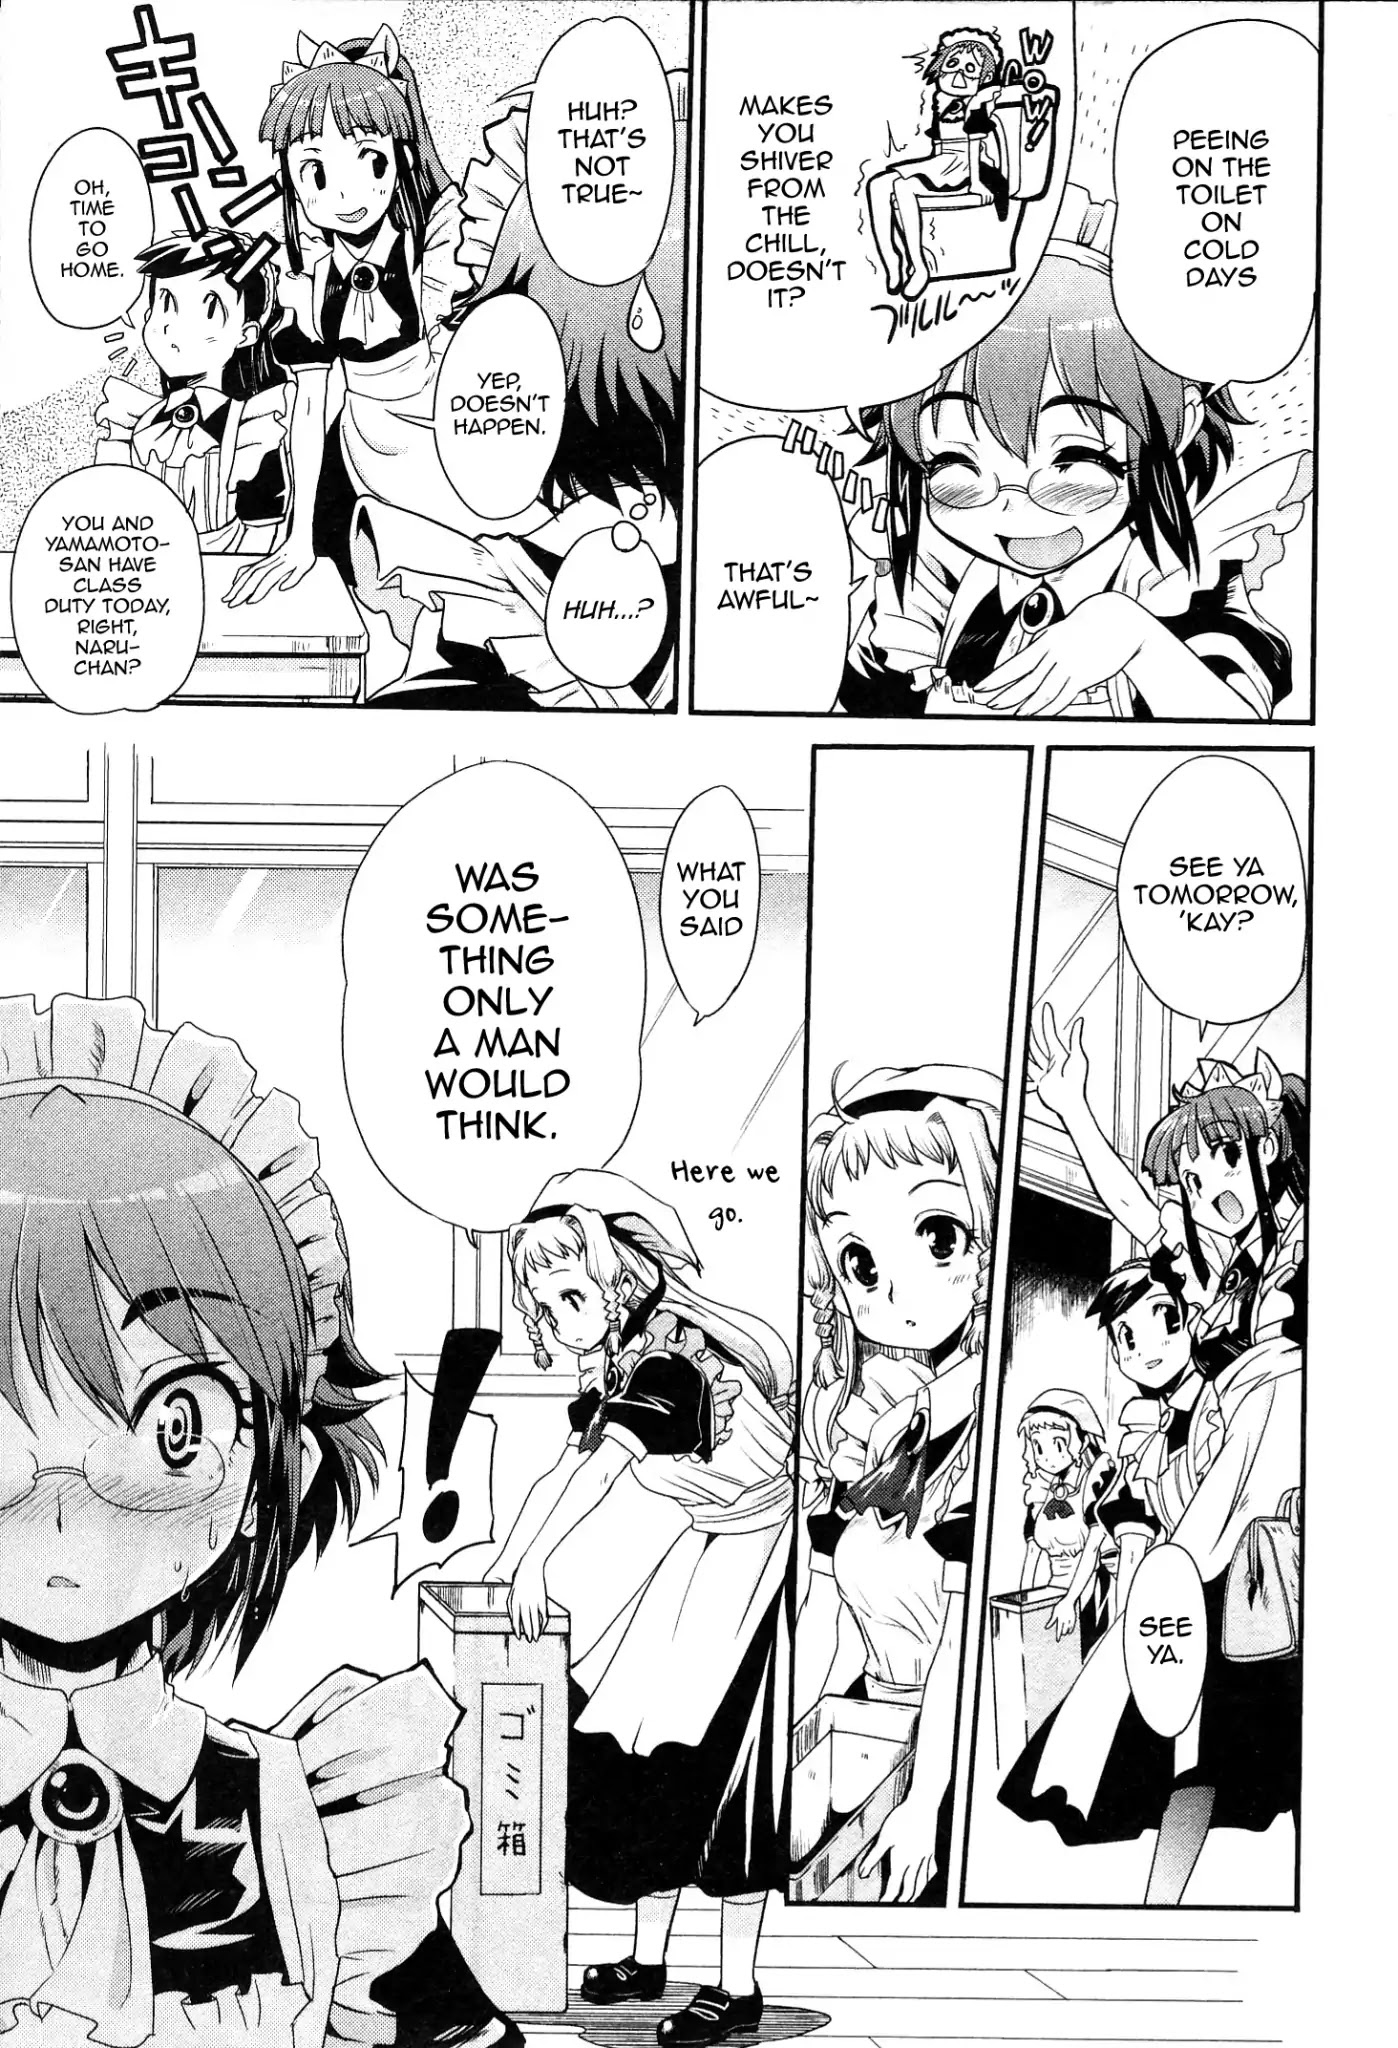 Maid In Japan - Page 3